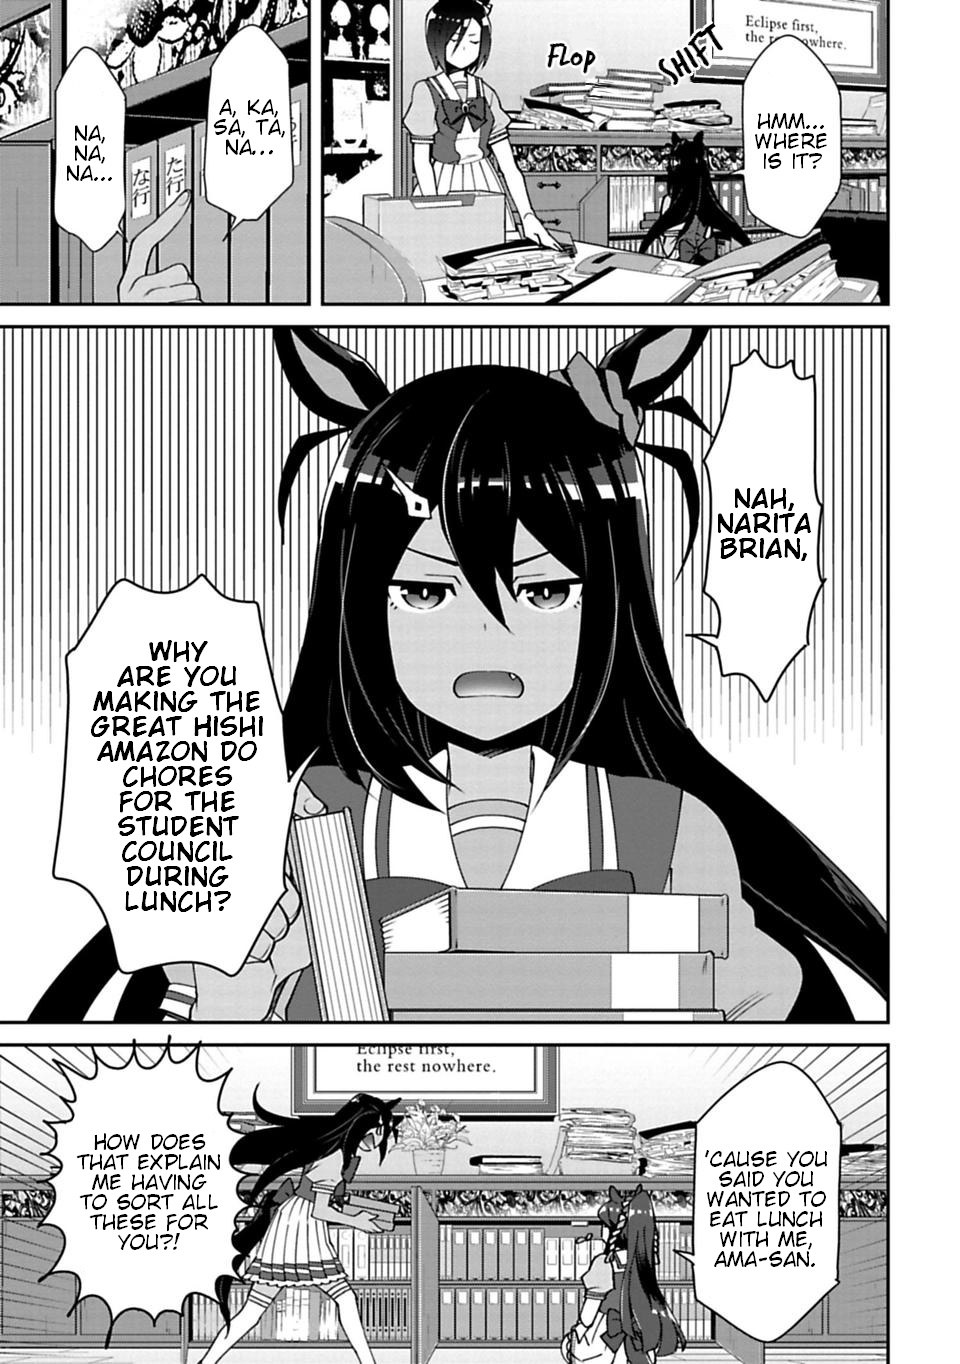 Starting Gate! Uma Musume Pretty Derby Vol.2 Chapter 13: Light #2 Part 1 - Picture 3